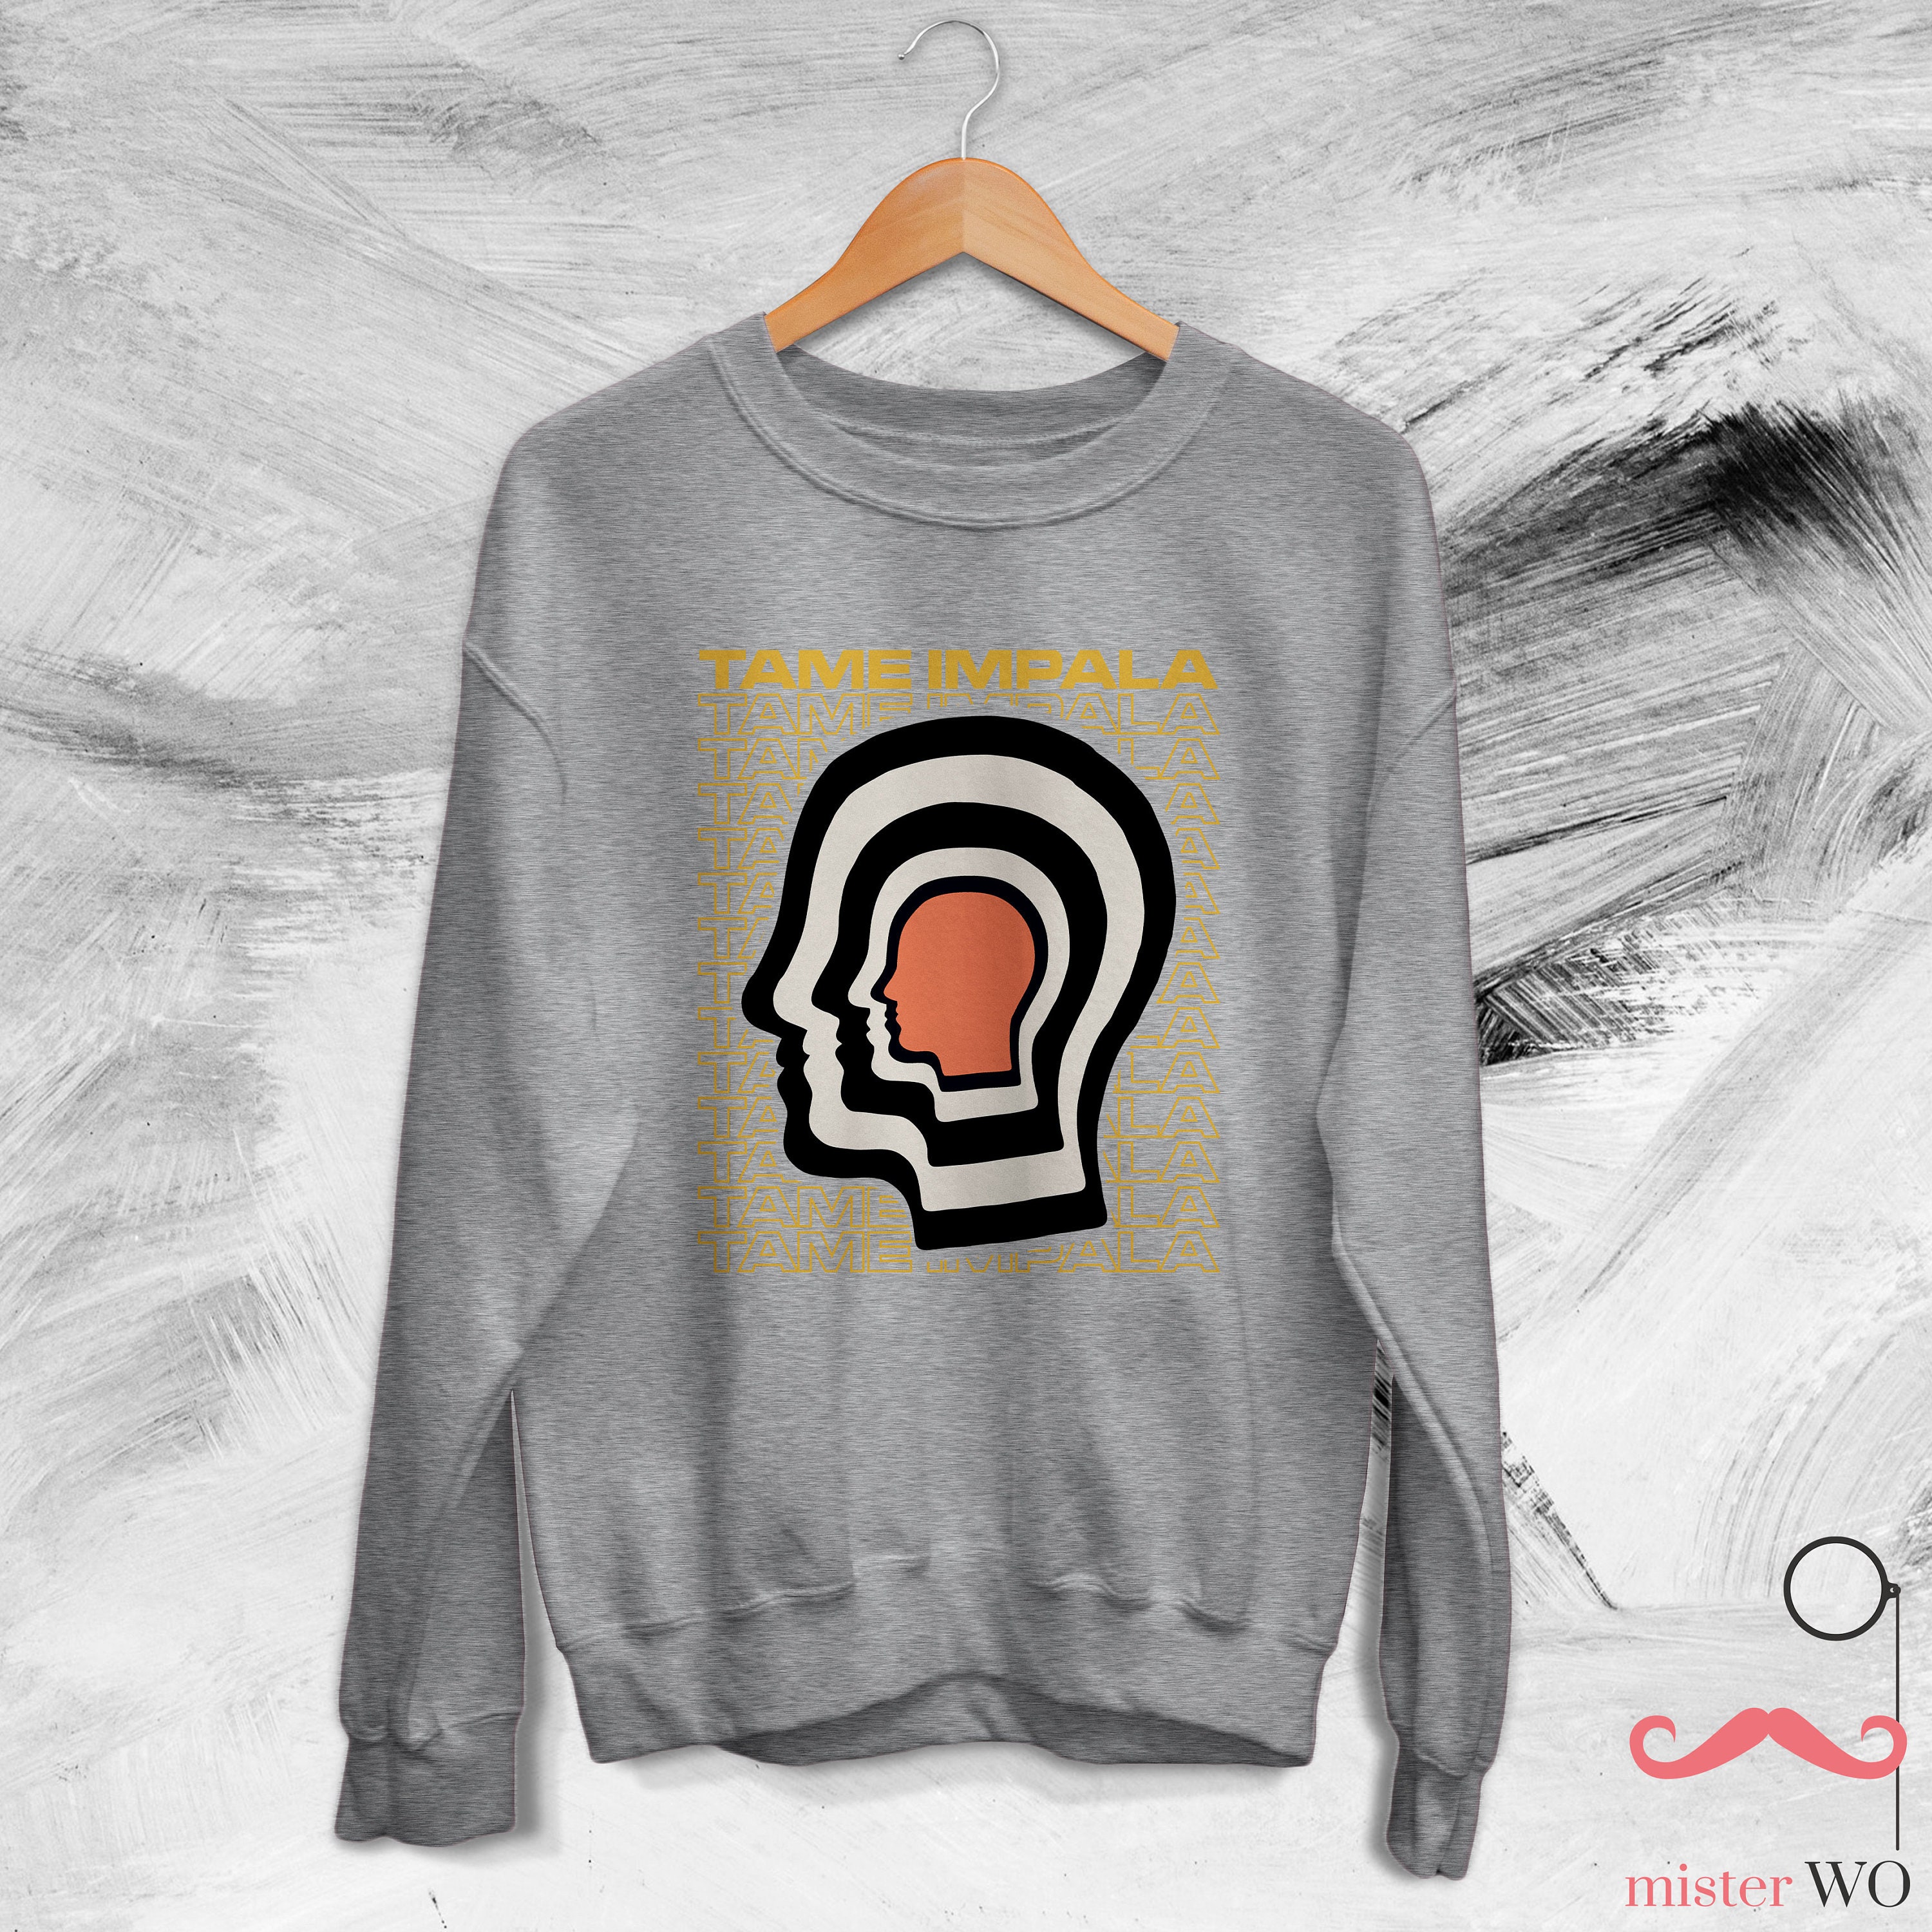 Tame Impala Band Faces Sweatshirt - Kevin Parker sold by Dooku